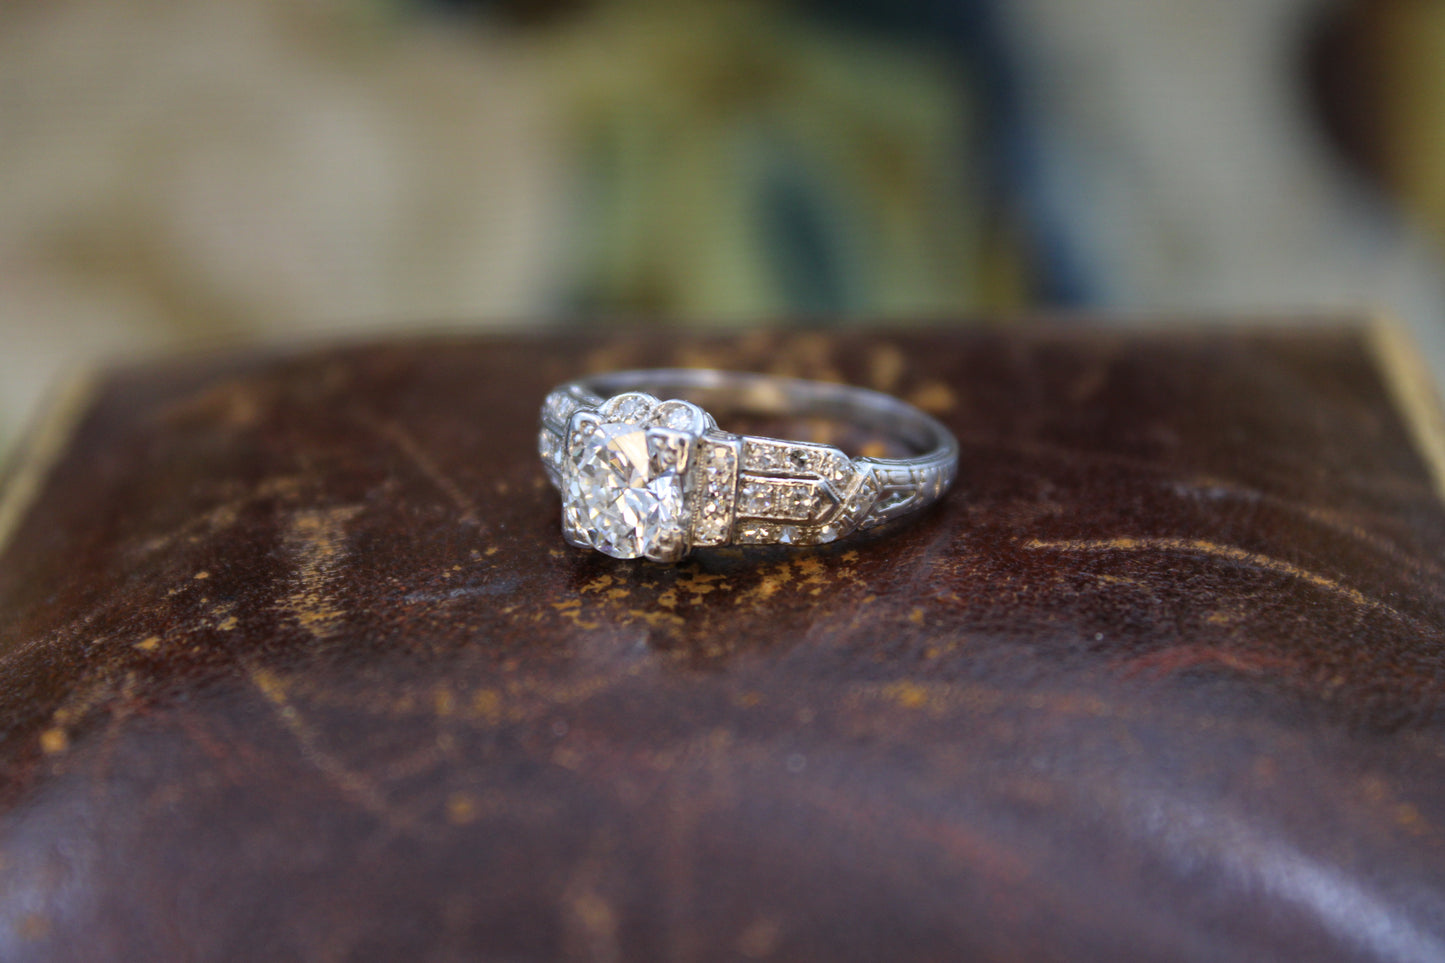 A very fine Art Deco 0.85ct Diamond Solitaire Ring mounted in Platinum, Circa 1930 - Robin Haydock Antiques